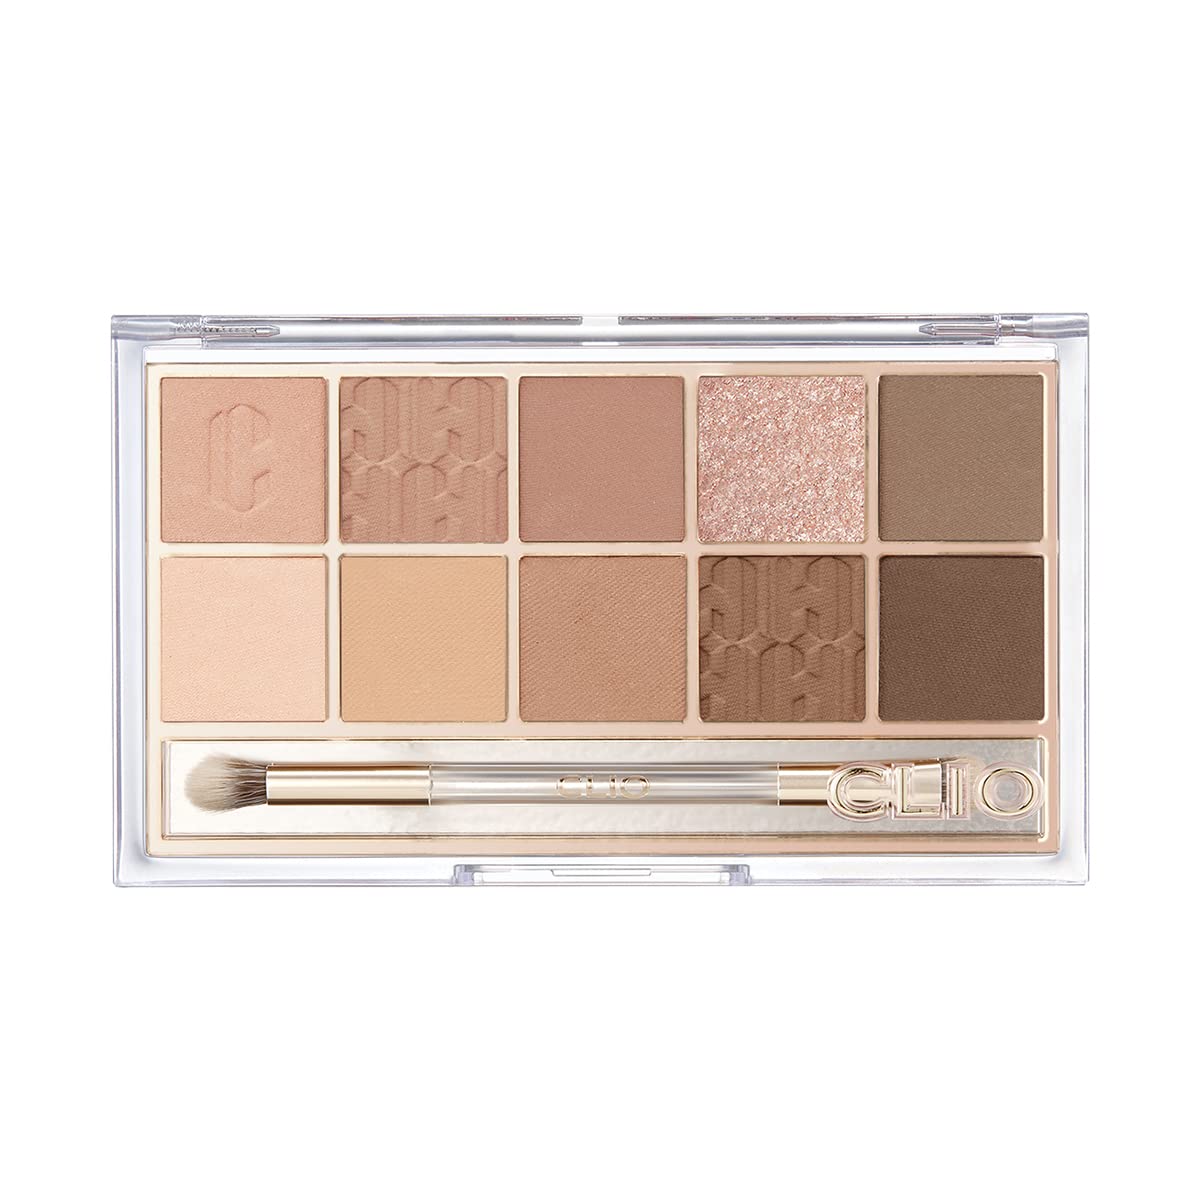 Clio - Pro Eye Palette (#Walking On The Cosy Alley)